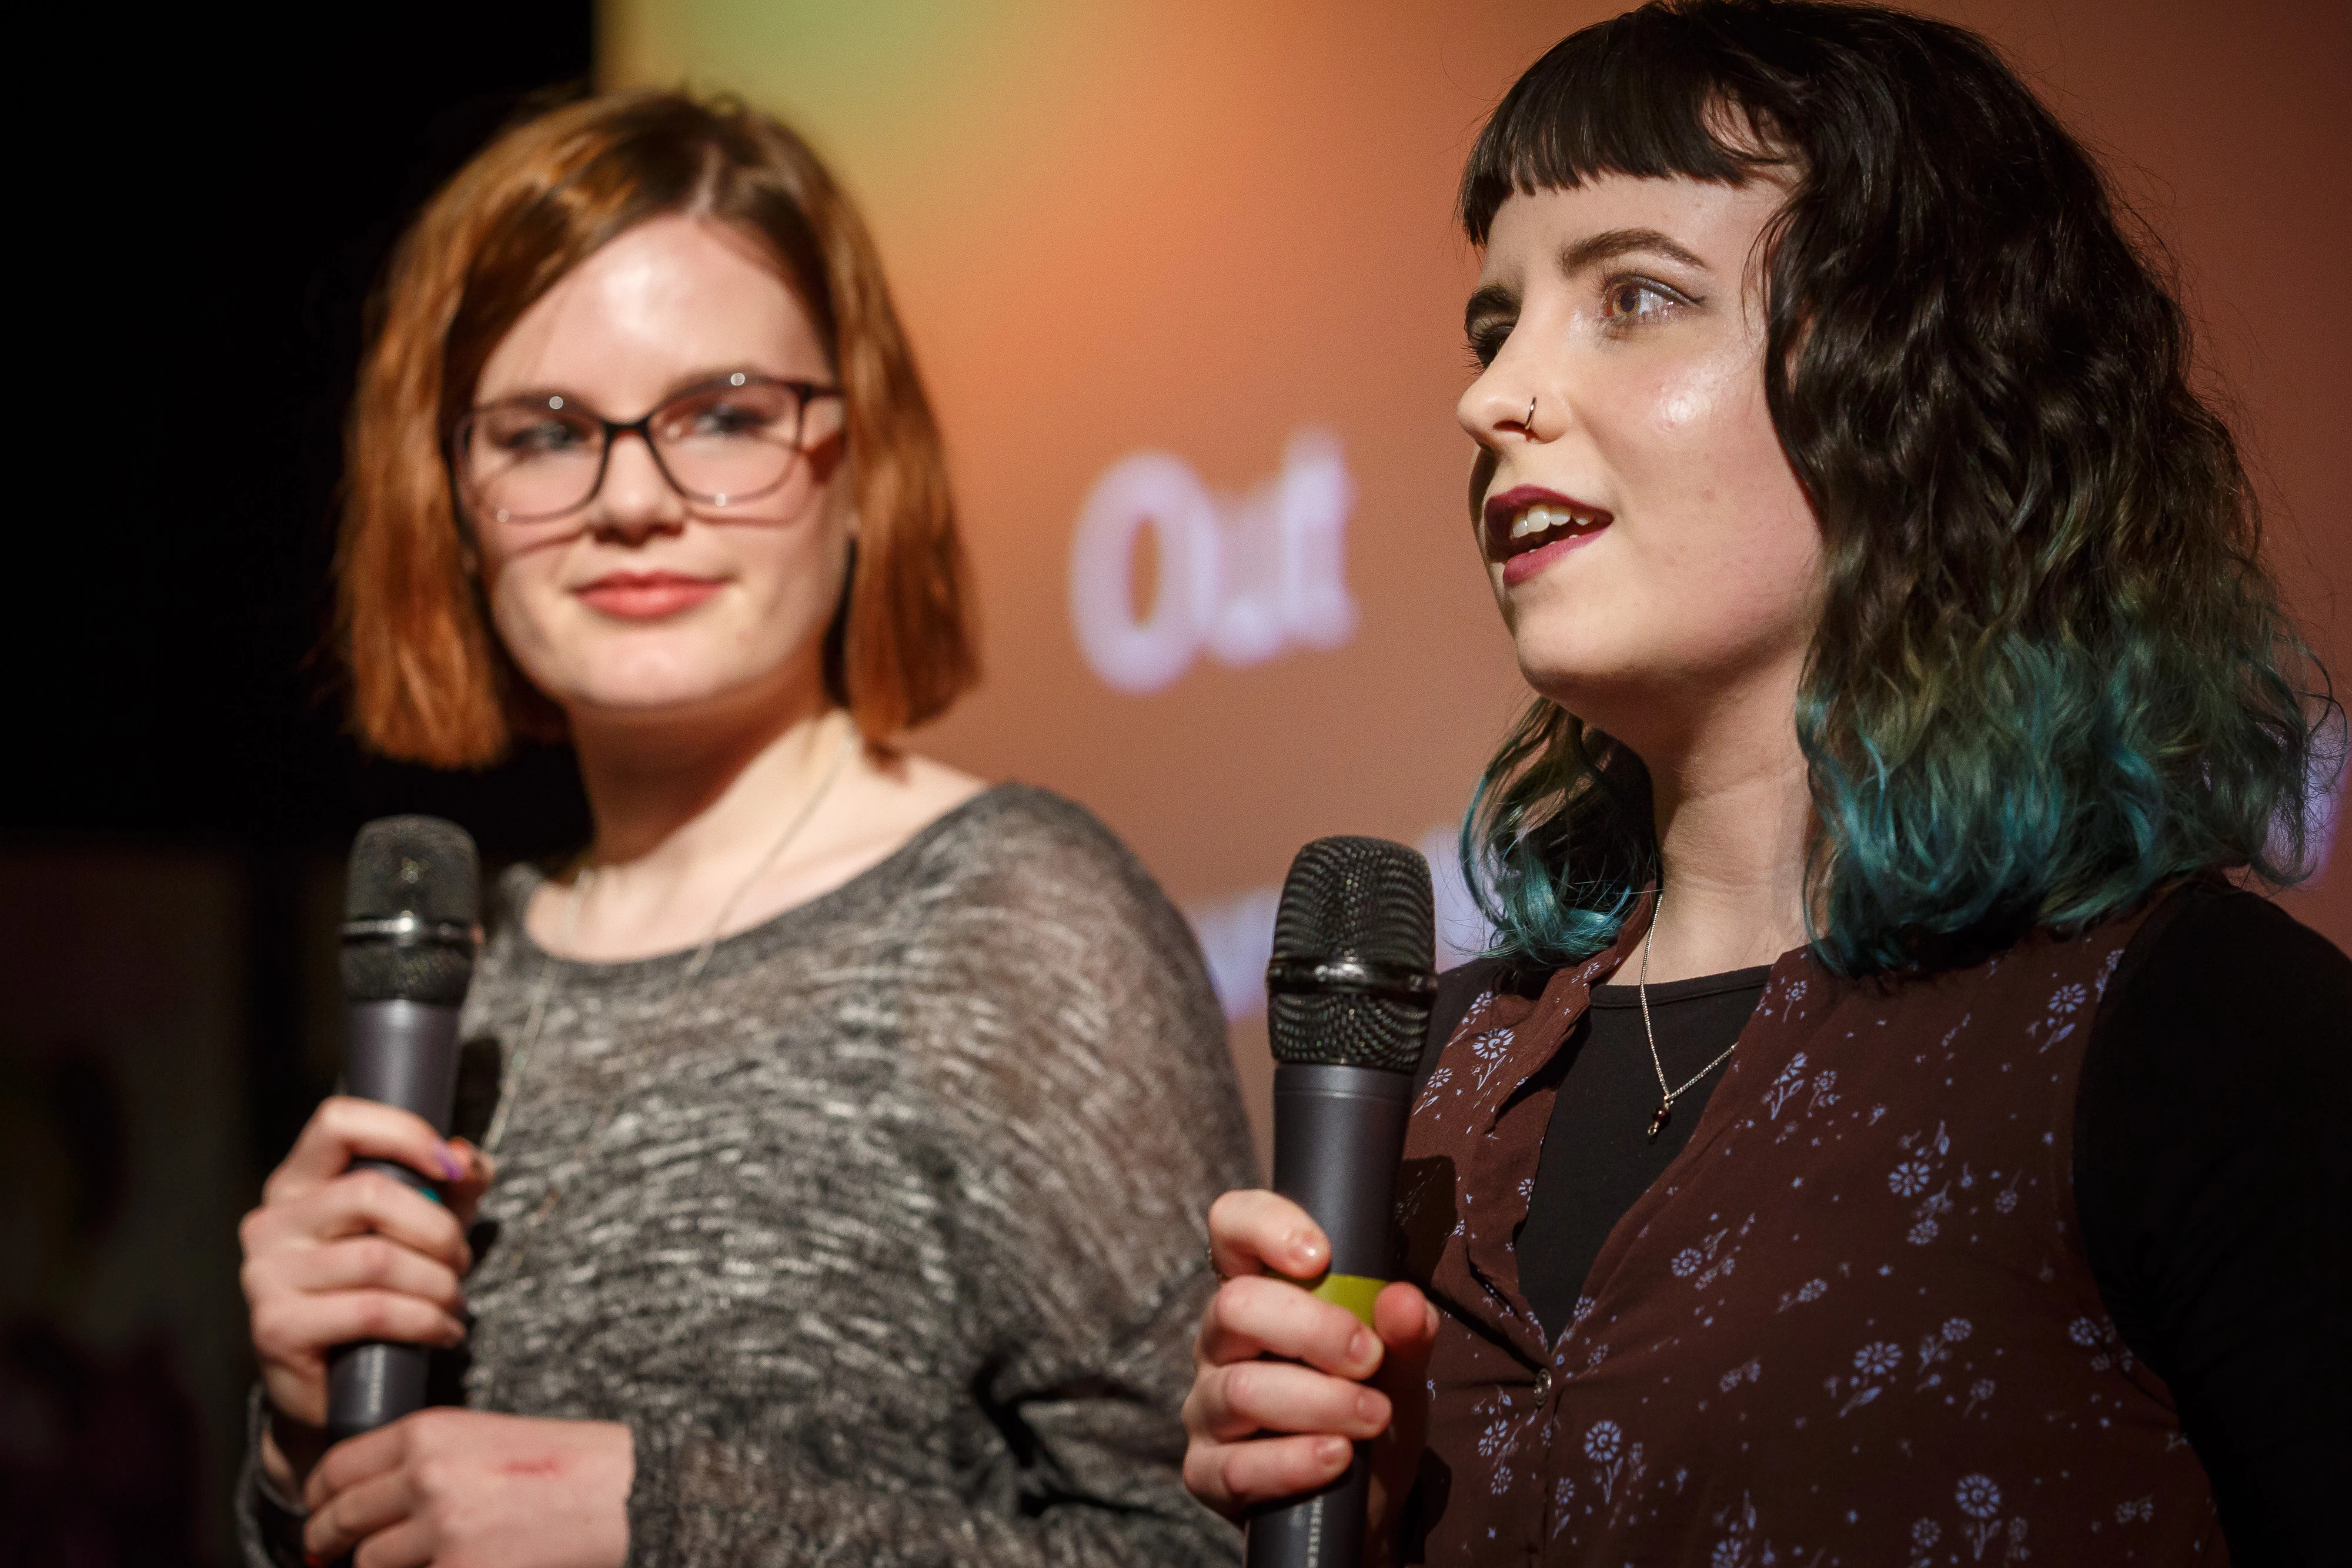 Lauren McCaughey, director of OUT, at the Northern Stars Documentary Academy 2016-17 Showcase at Tyneside Cinema (pictured right, with Issy De’ath, producer of OUT, left). Image credit Tony Hall.